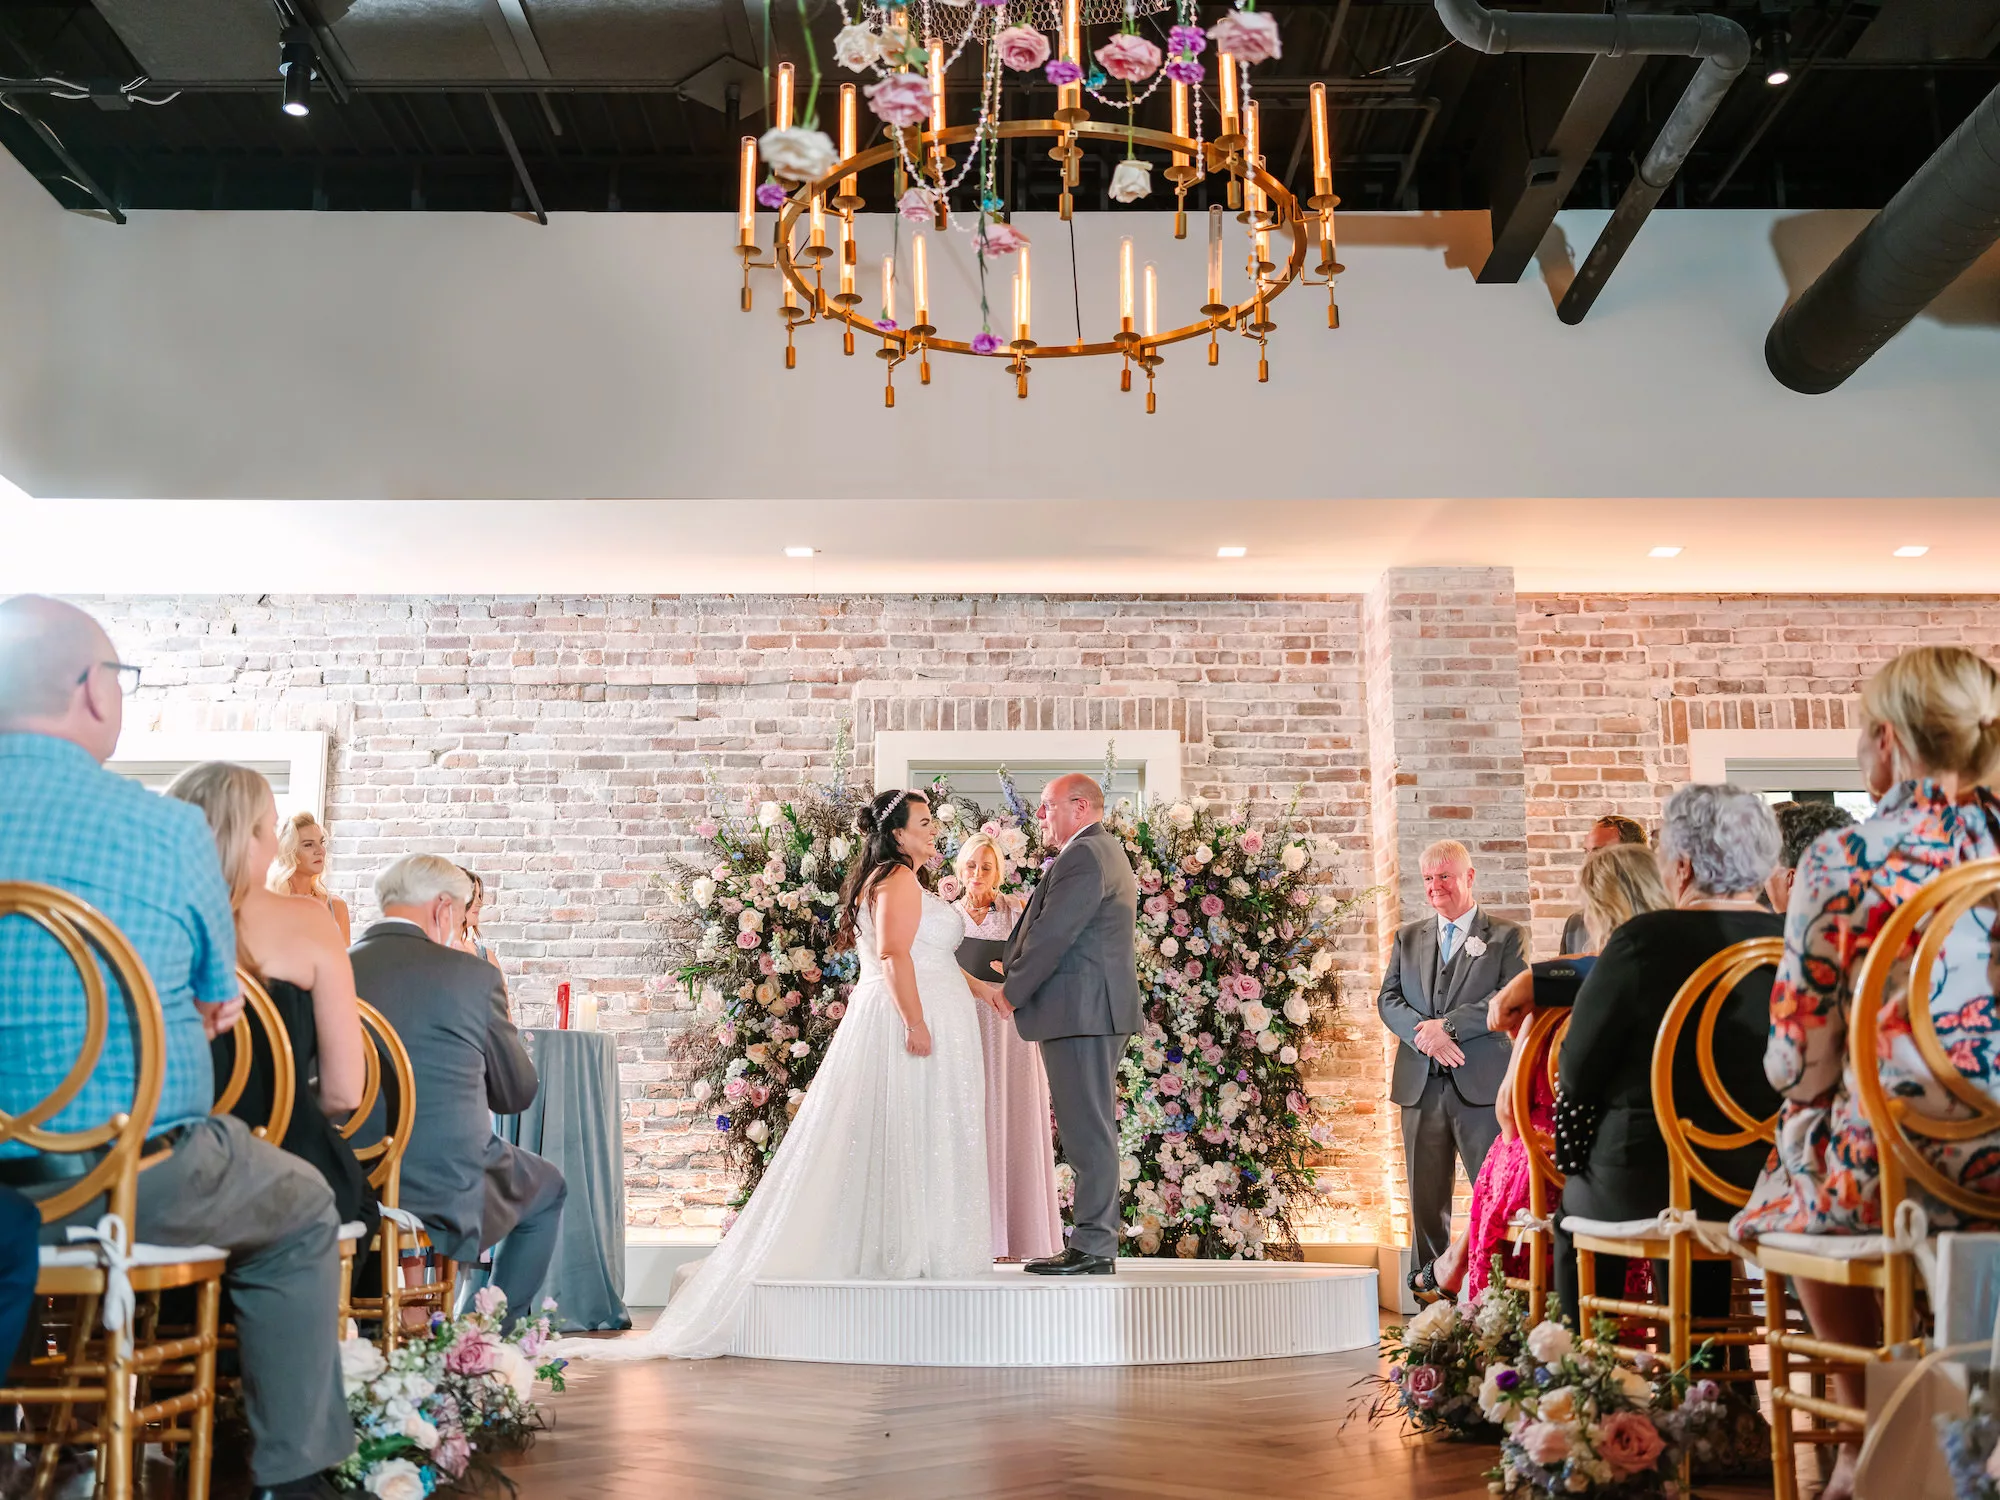 Whimsical Indoor Wedding Reception Ideas | Whimcial Pink Roses, White Hydrangeas, Blue Stock Flowers, and Greenery Backdrop Inspiration | Hanging Rose and Carnation Chandelier | Downtown St. Pete Venue Red Mesa Events | Planner Wilder Mind Events